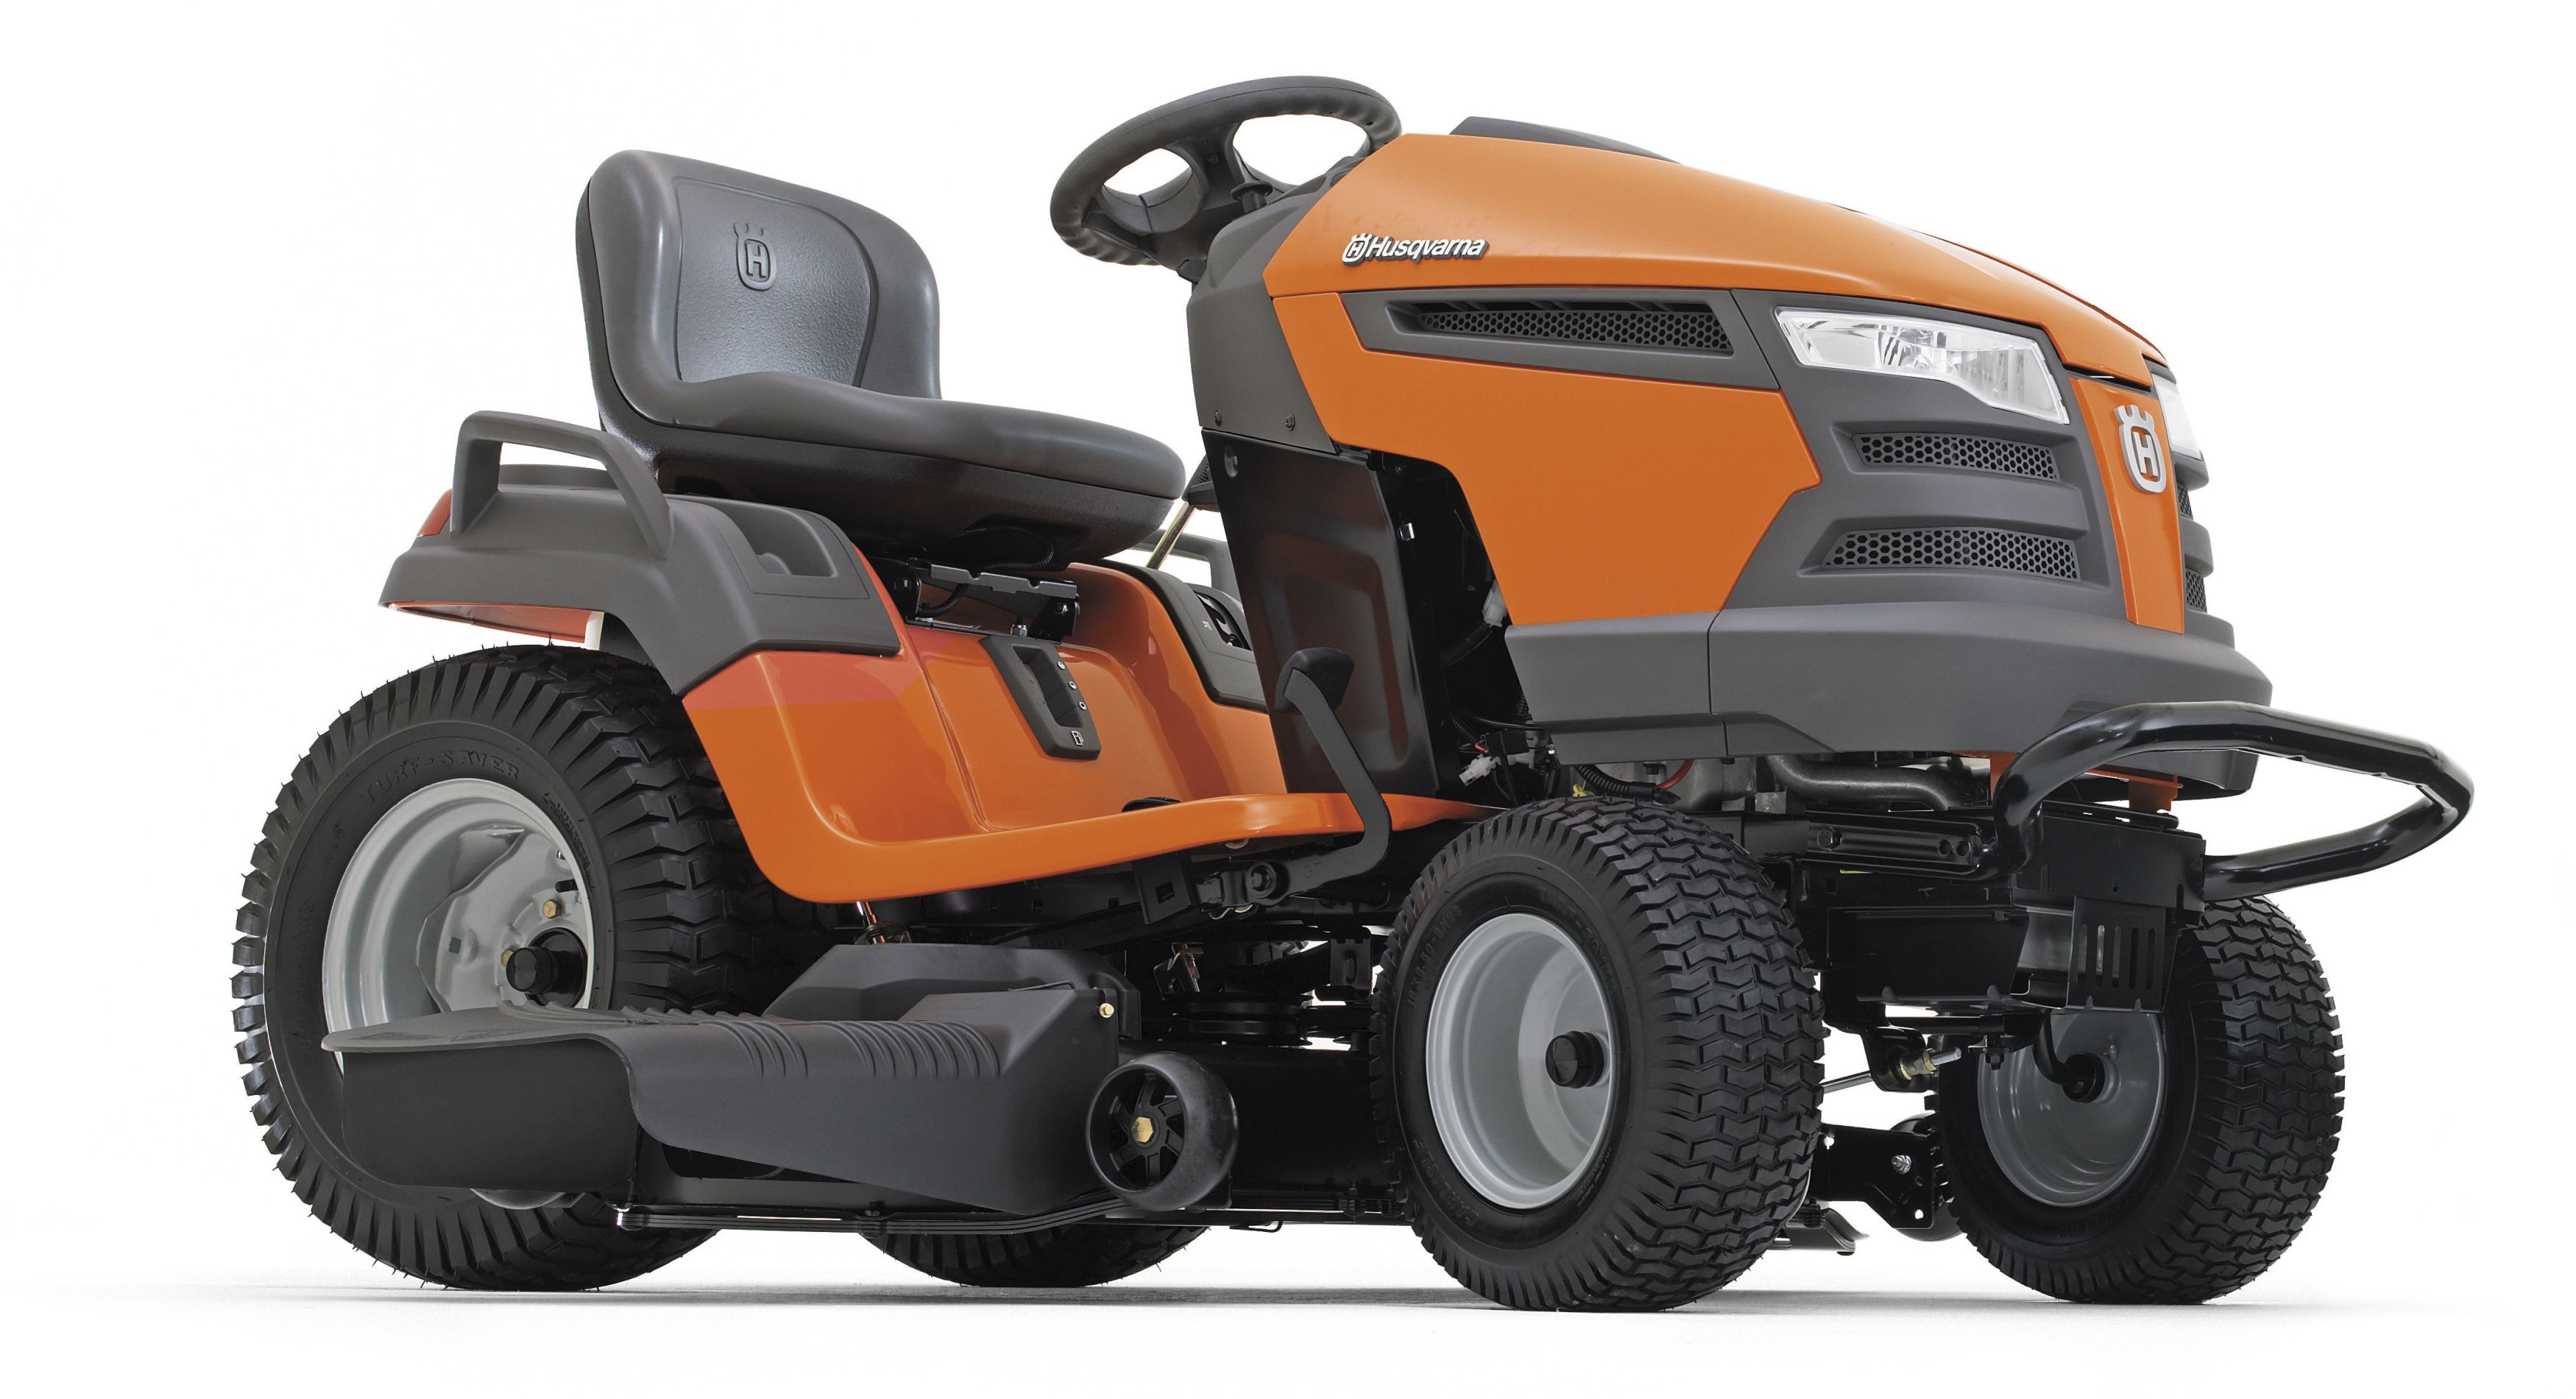 Contact us for any other Husqvarna Equipment here